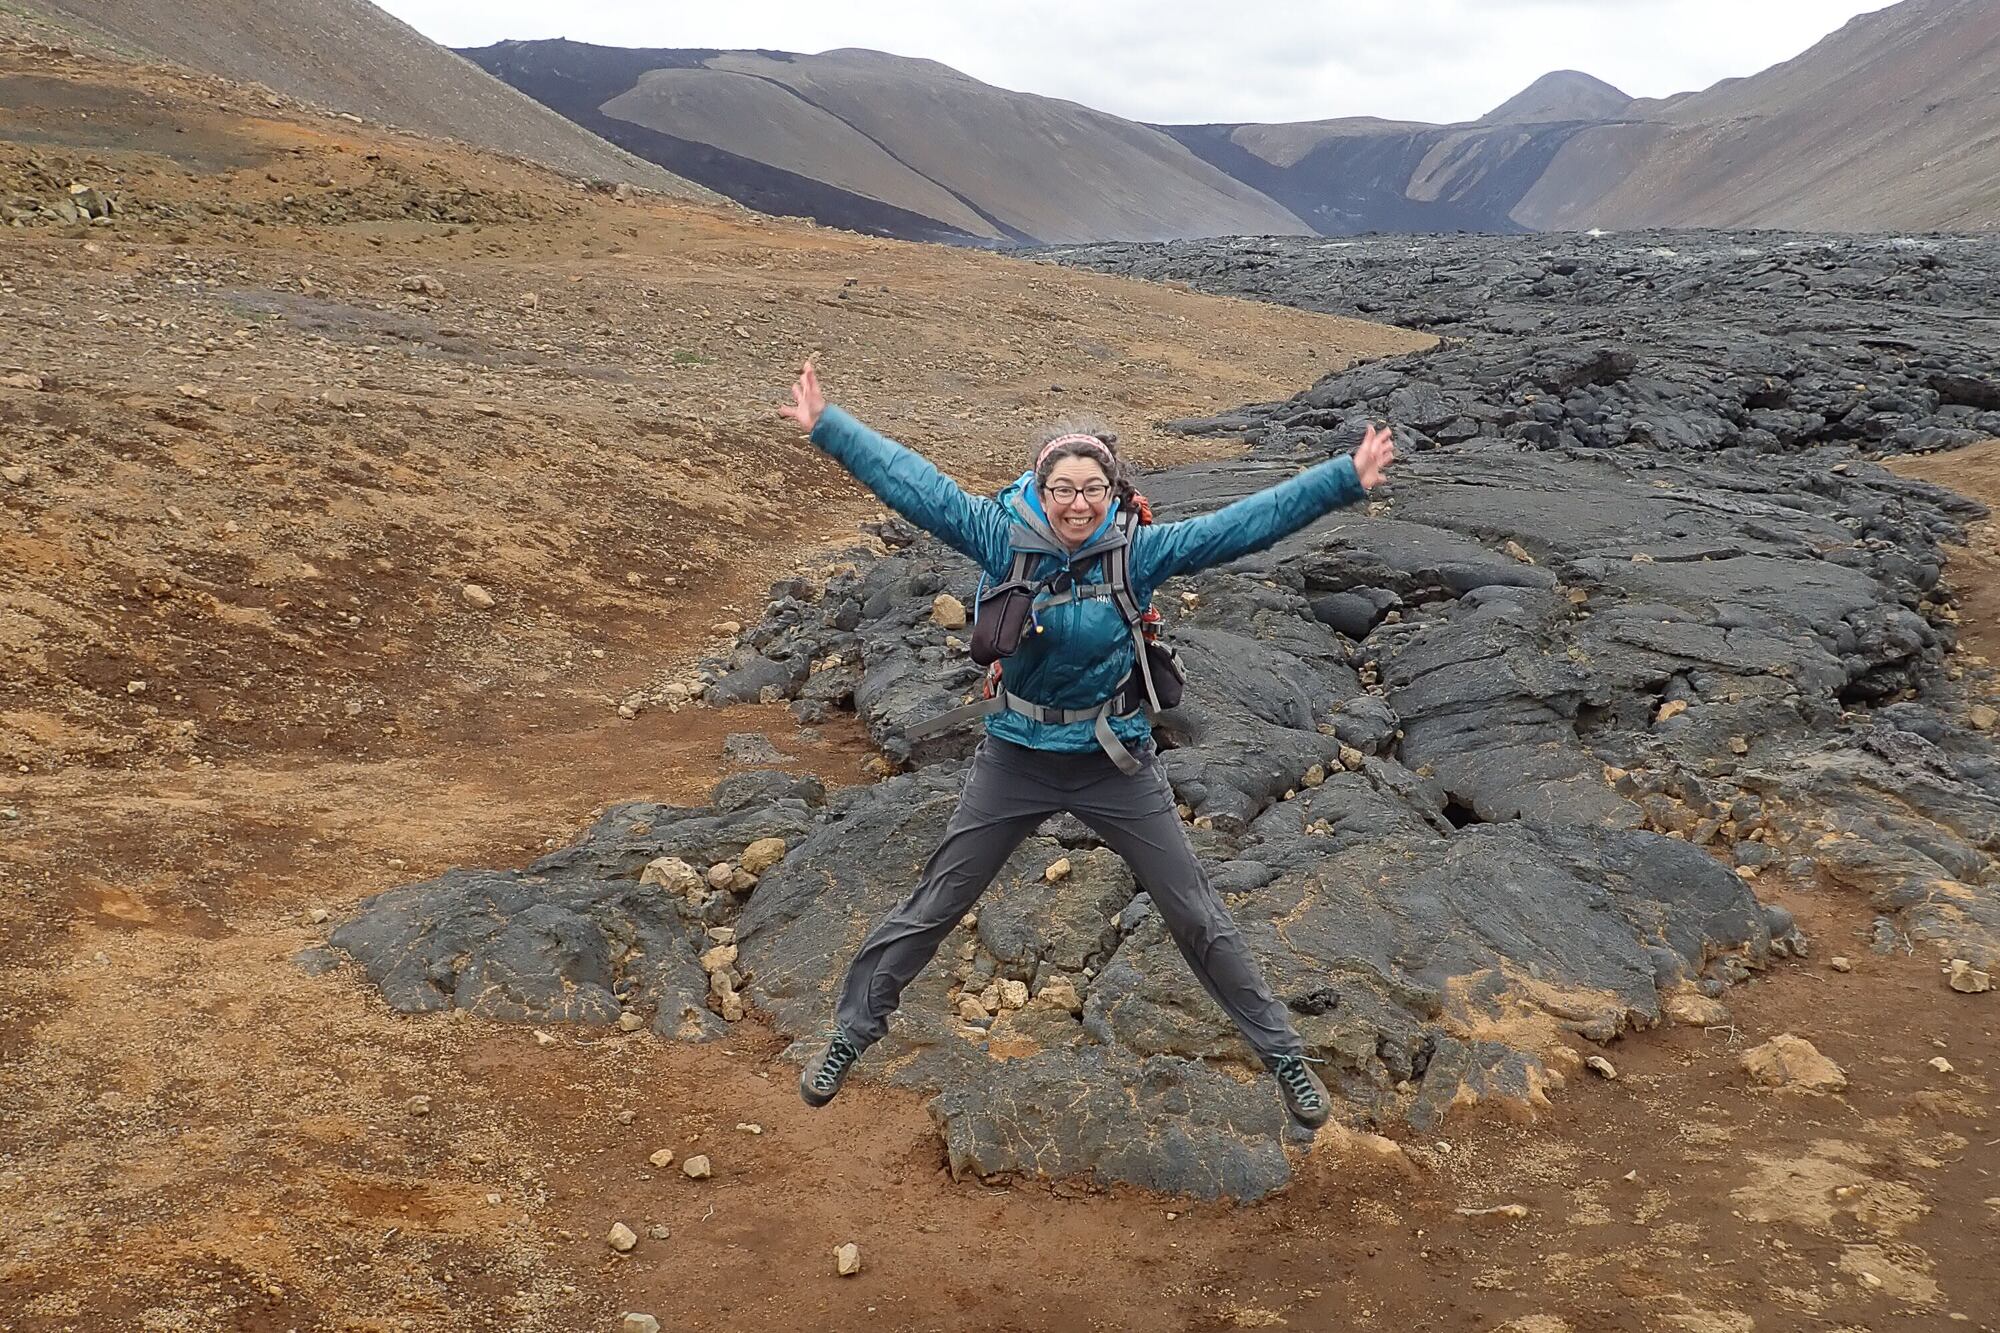 A woman jumping off the ground with her arms and legs outstretched in a volcanic area in Iceland.